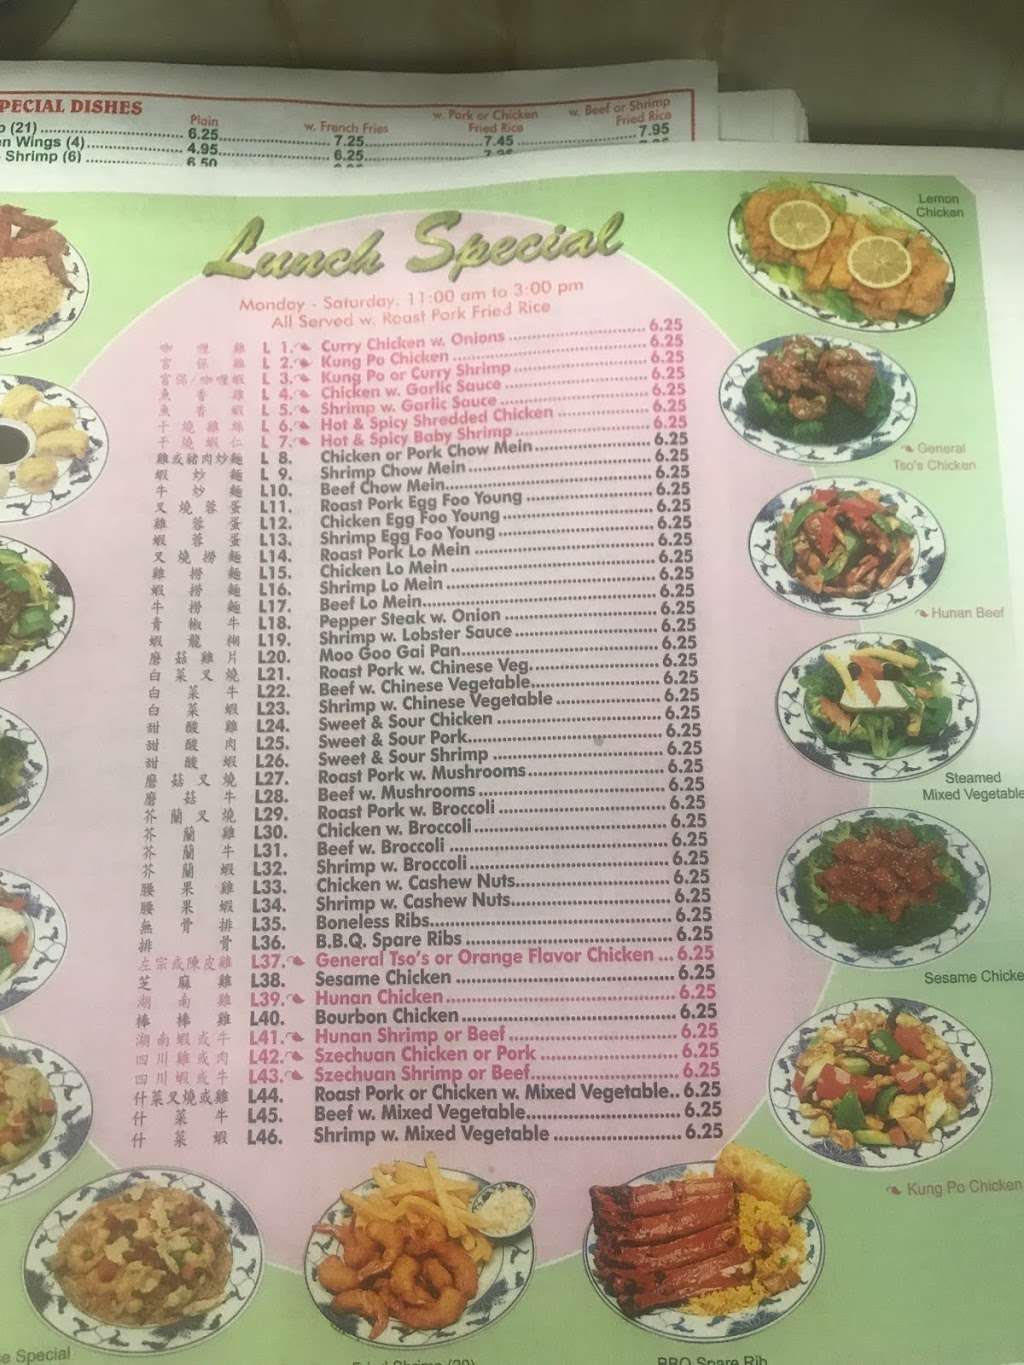 Great Wall Chinese Restaurant | 4045 North Point Blvd, Dundalk, MD 21222 | Phone: (410) 477-4605